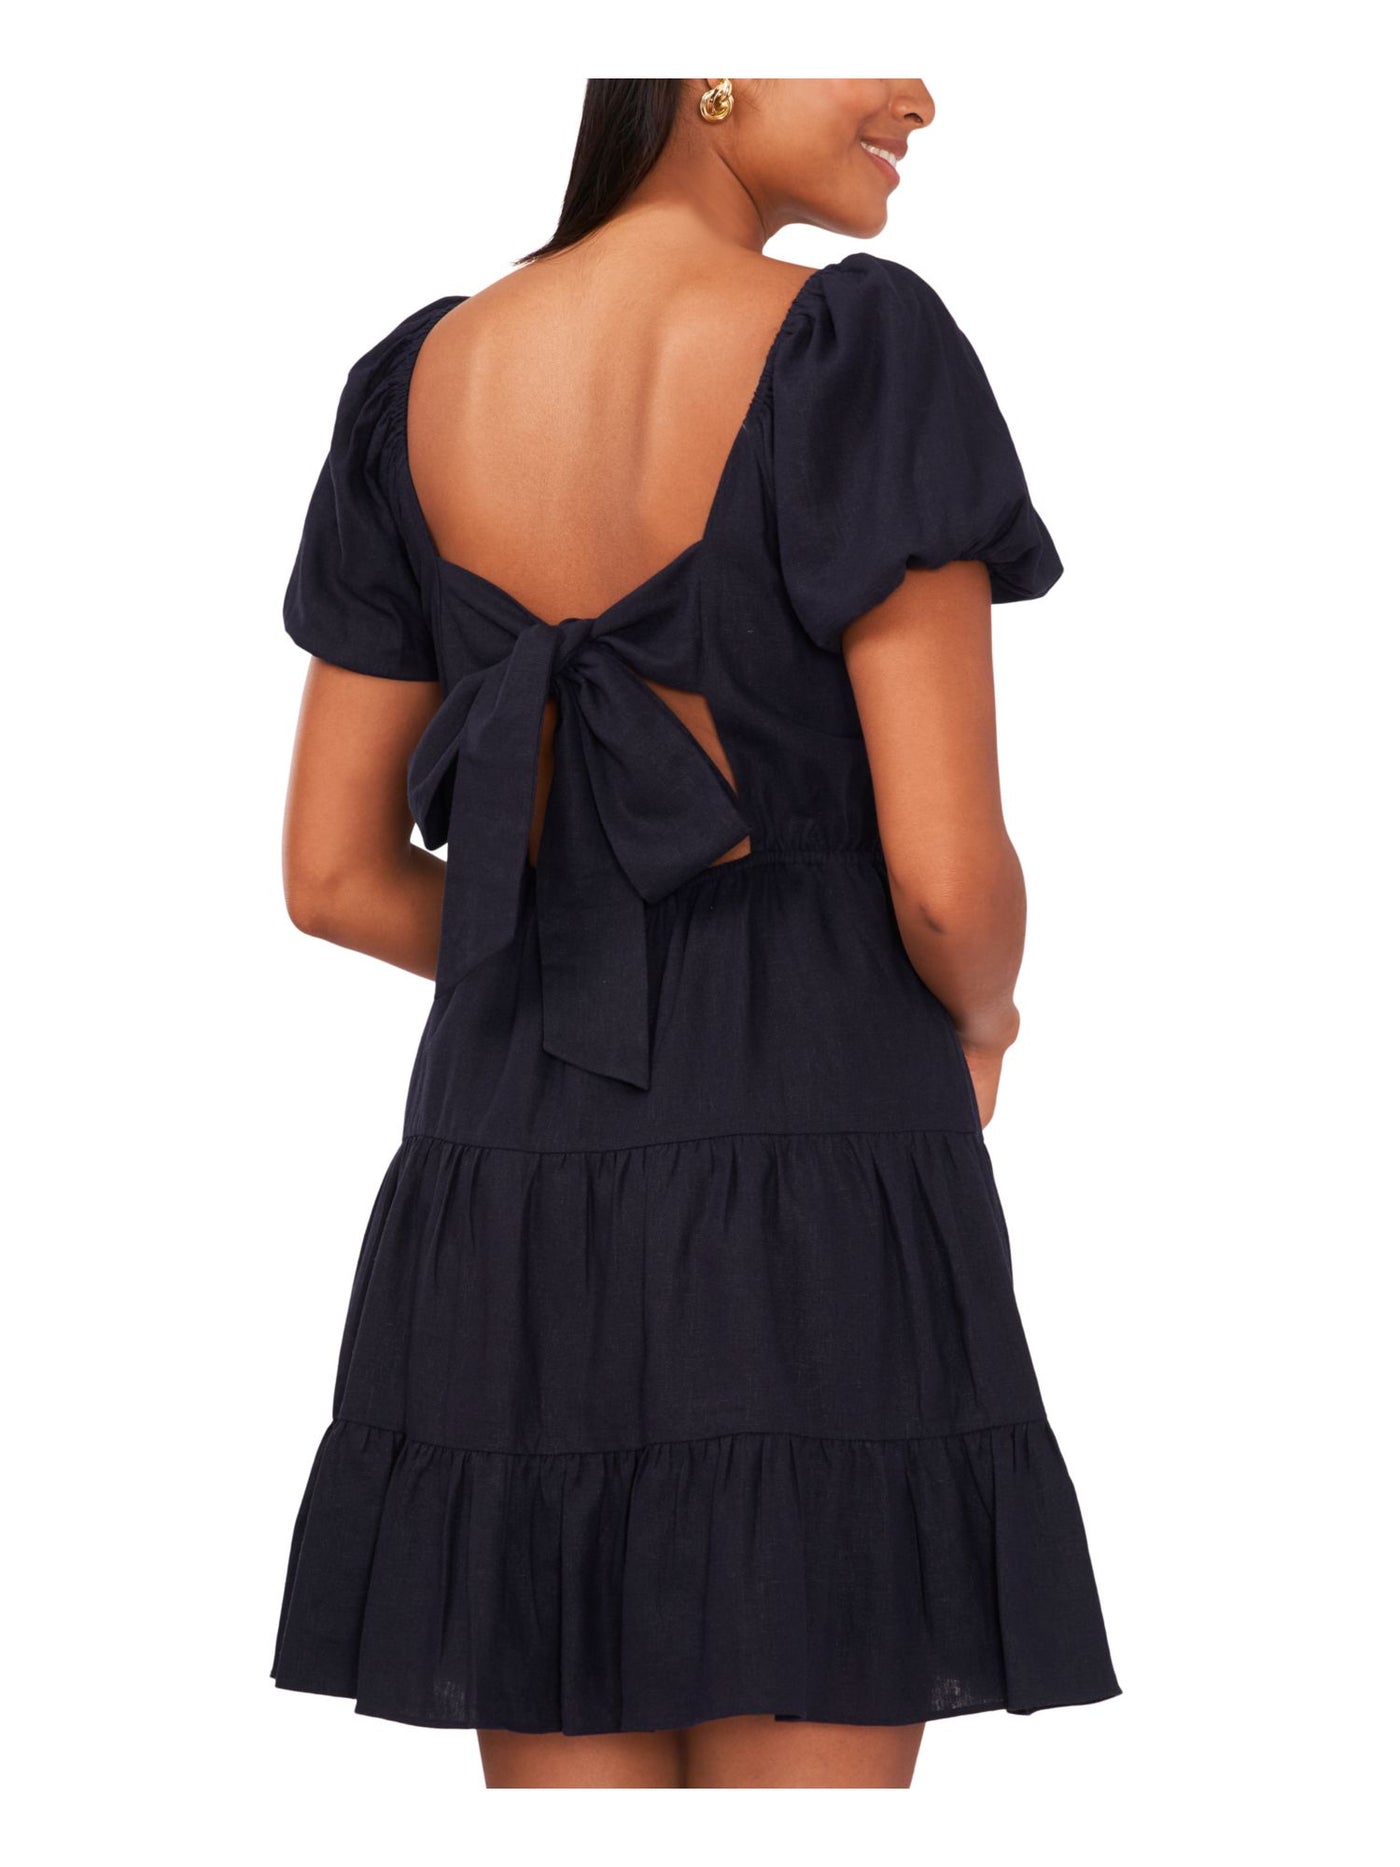 CECE Womens Navy Open Back Tie Tiered Skirt Pouf Sleeve Square Neck Short Party Fit + Flare Dress XL